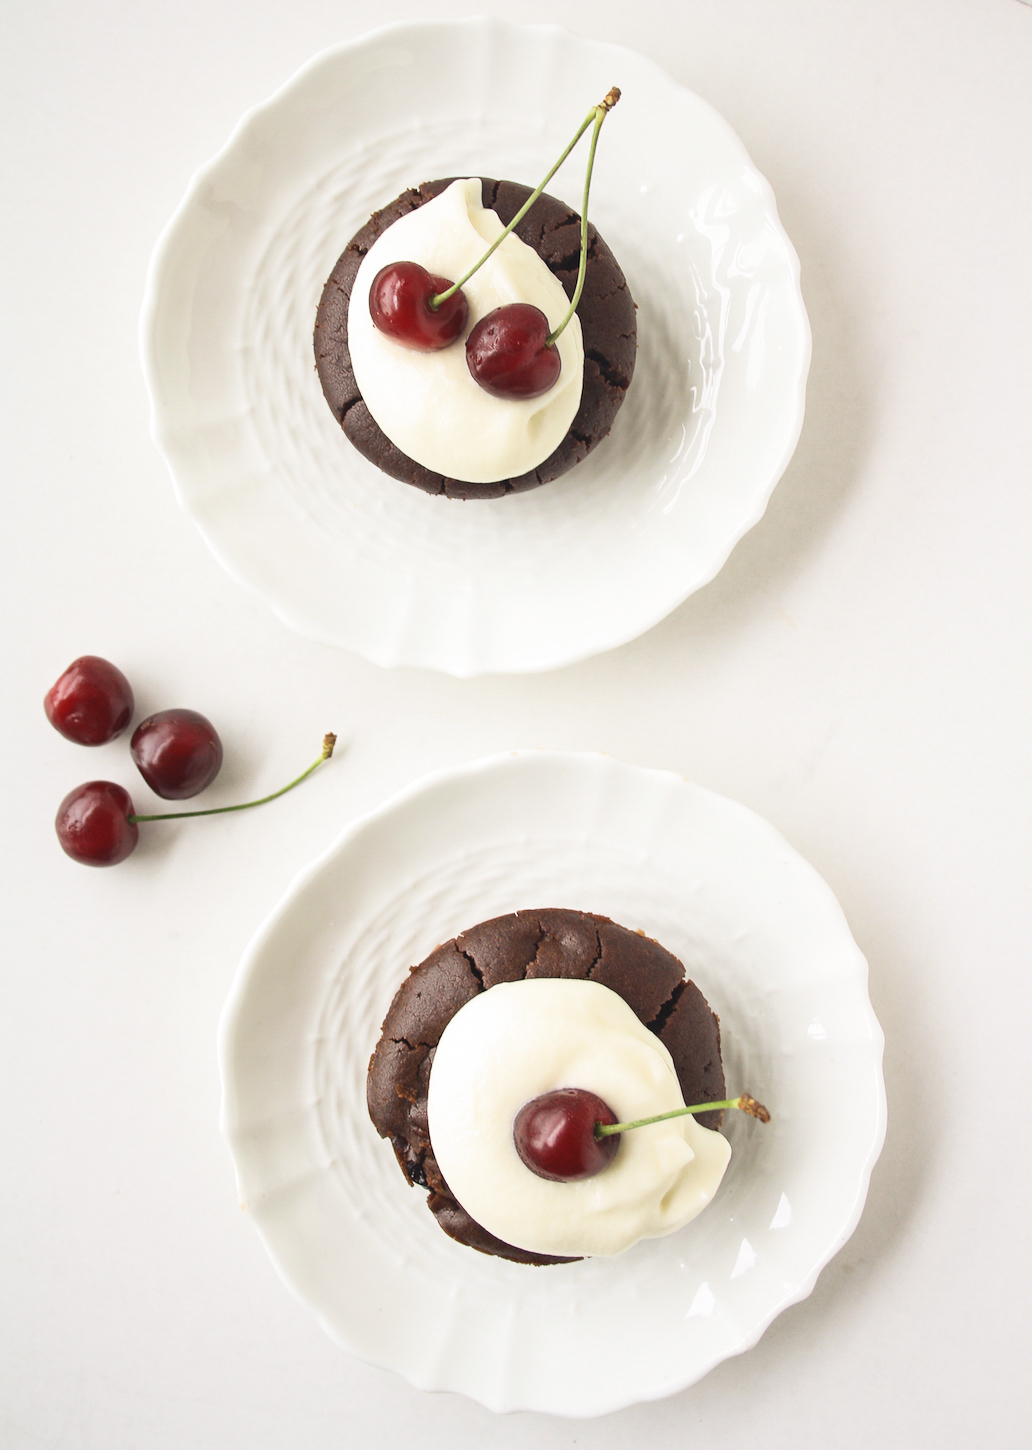 Rich, fudgy cakes filled with rum-soaked fresh cherries, served with a simple vanilla mascarpone topping!